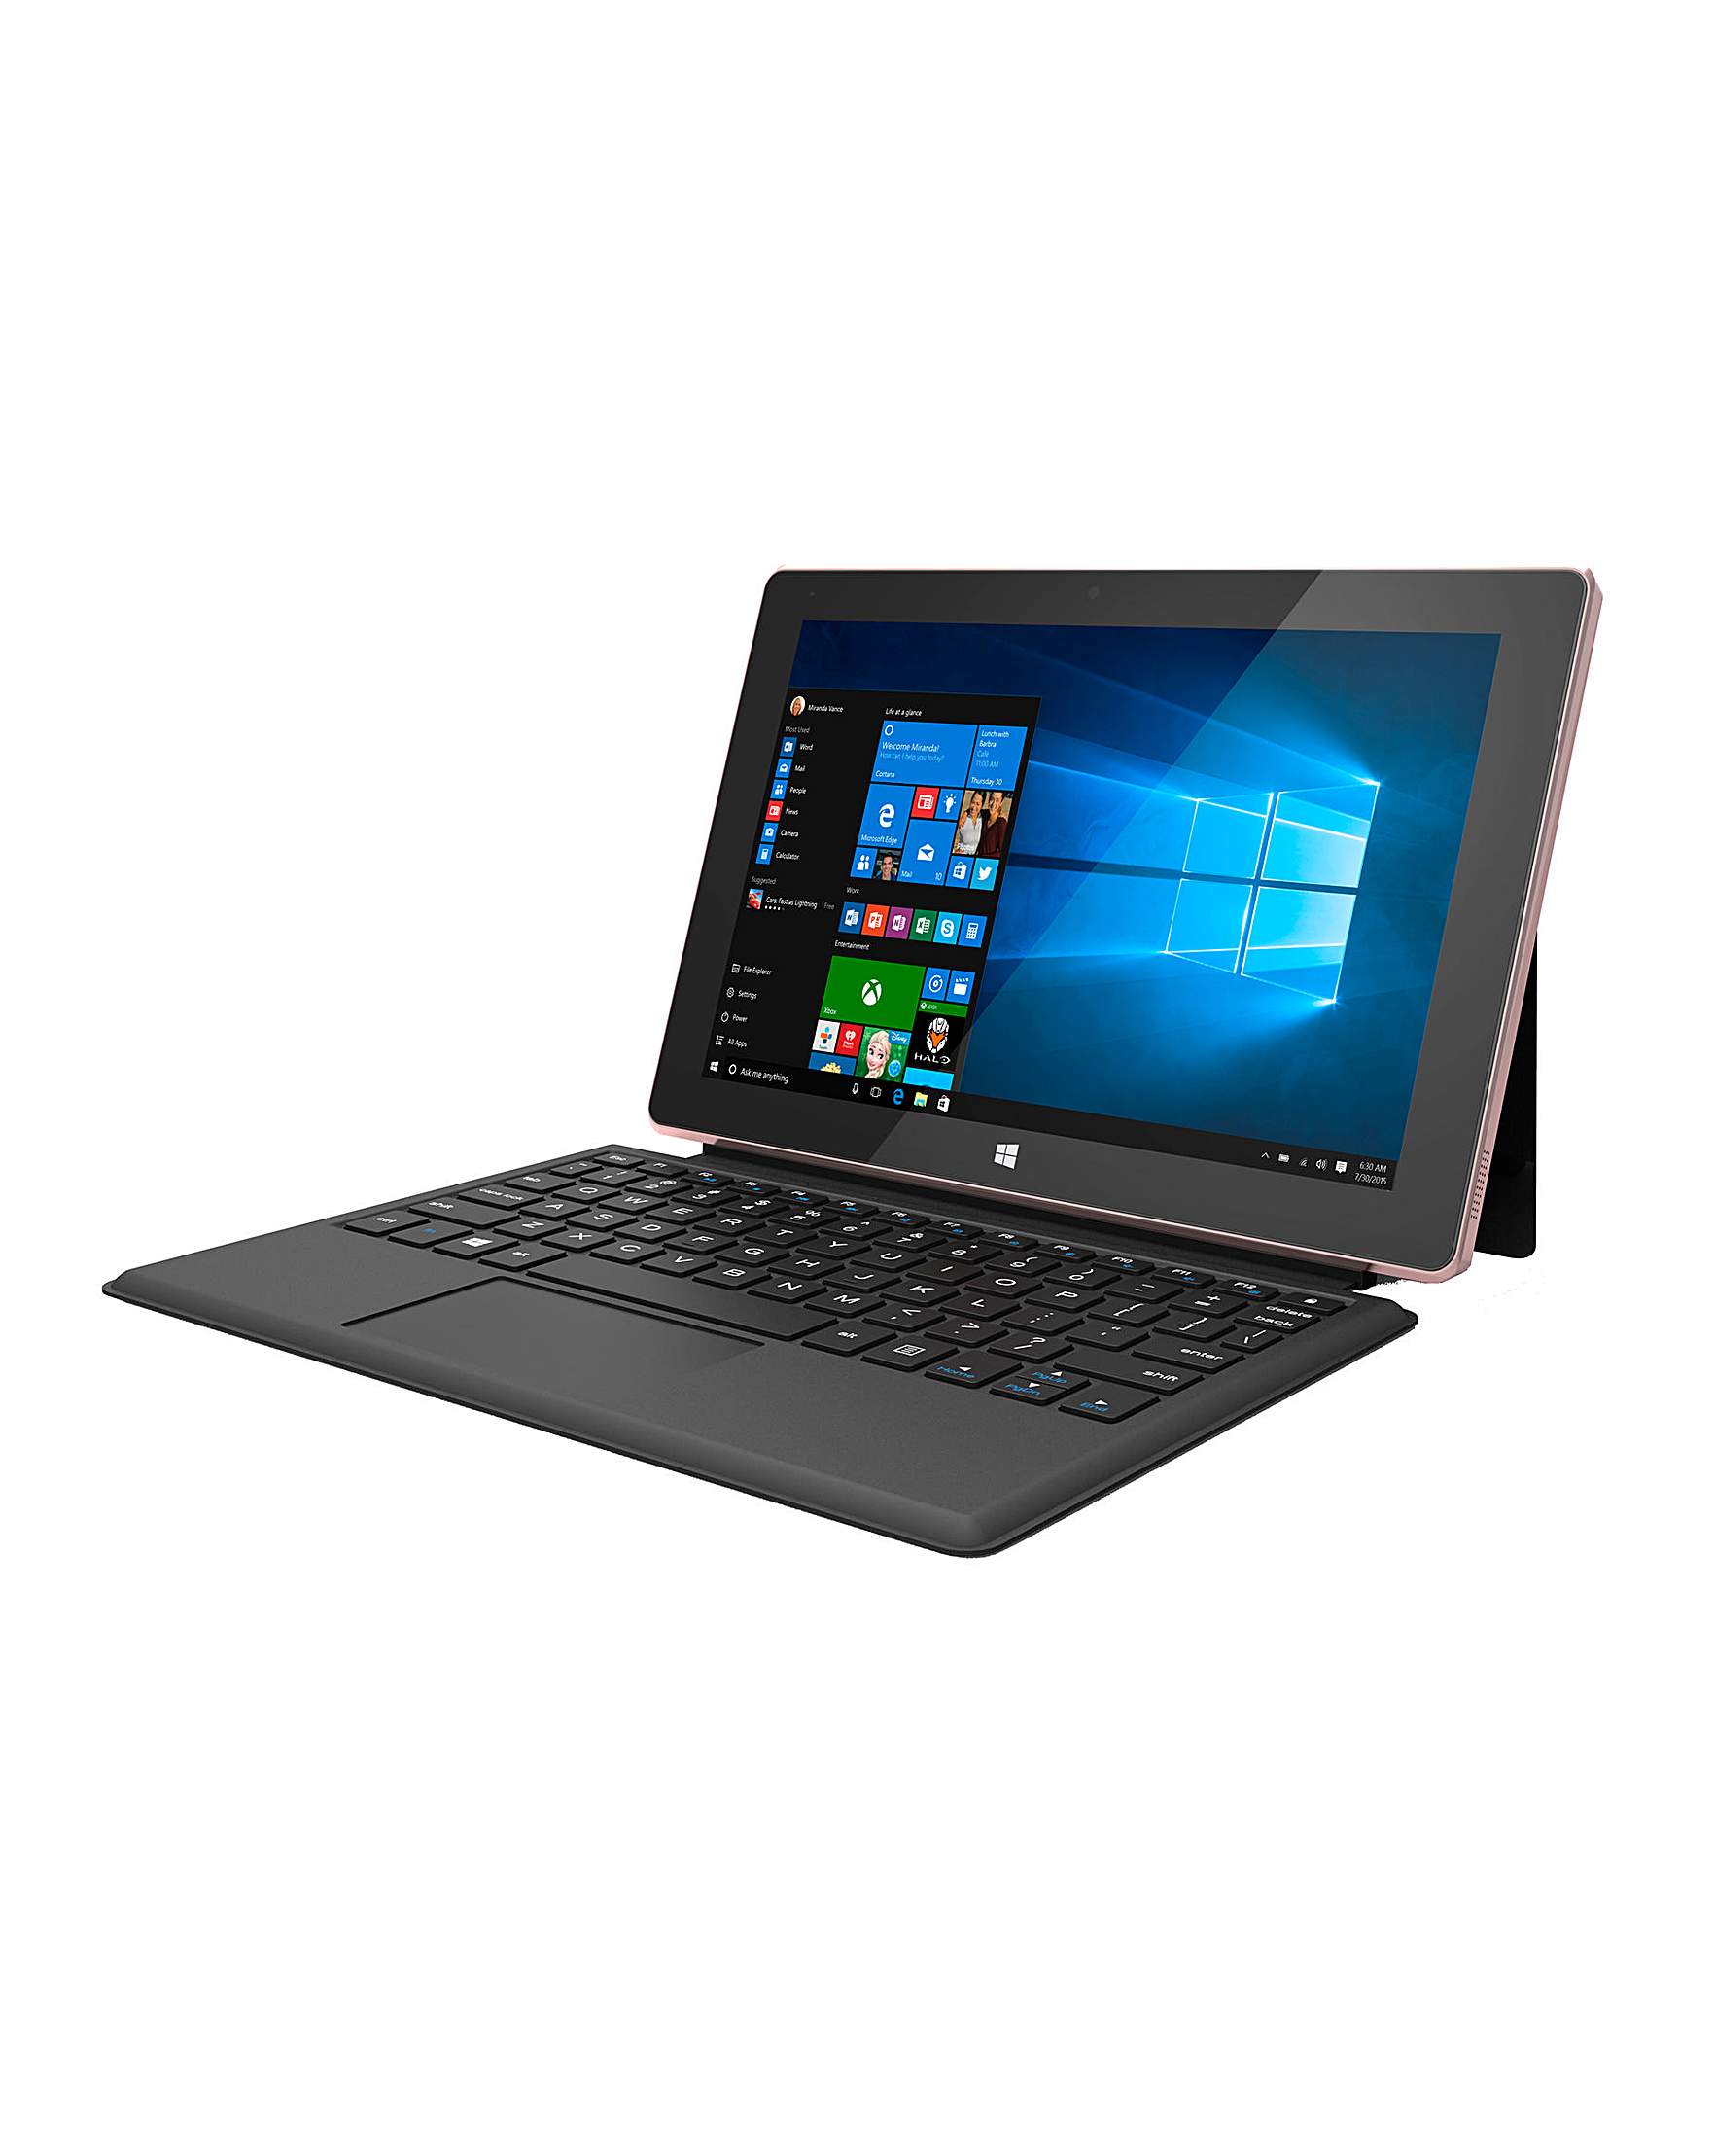 How do you buy a tablet laptop PC?